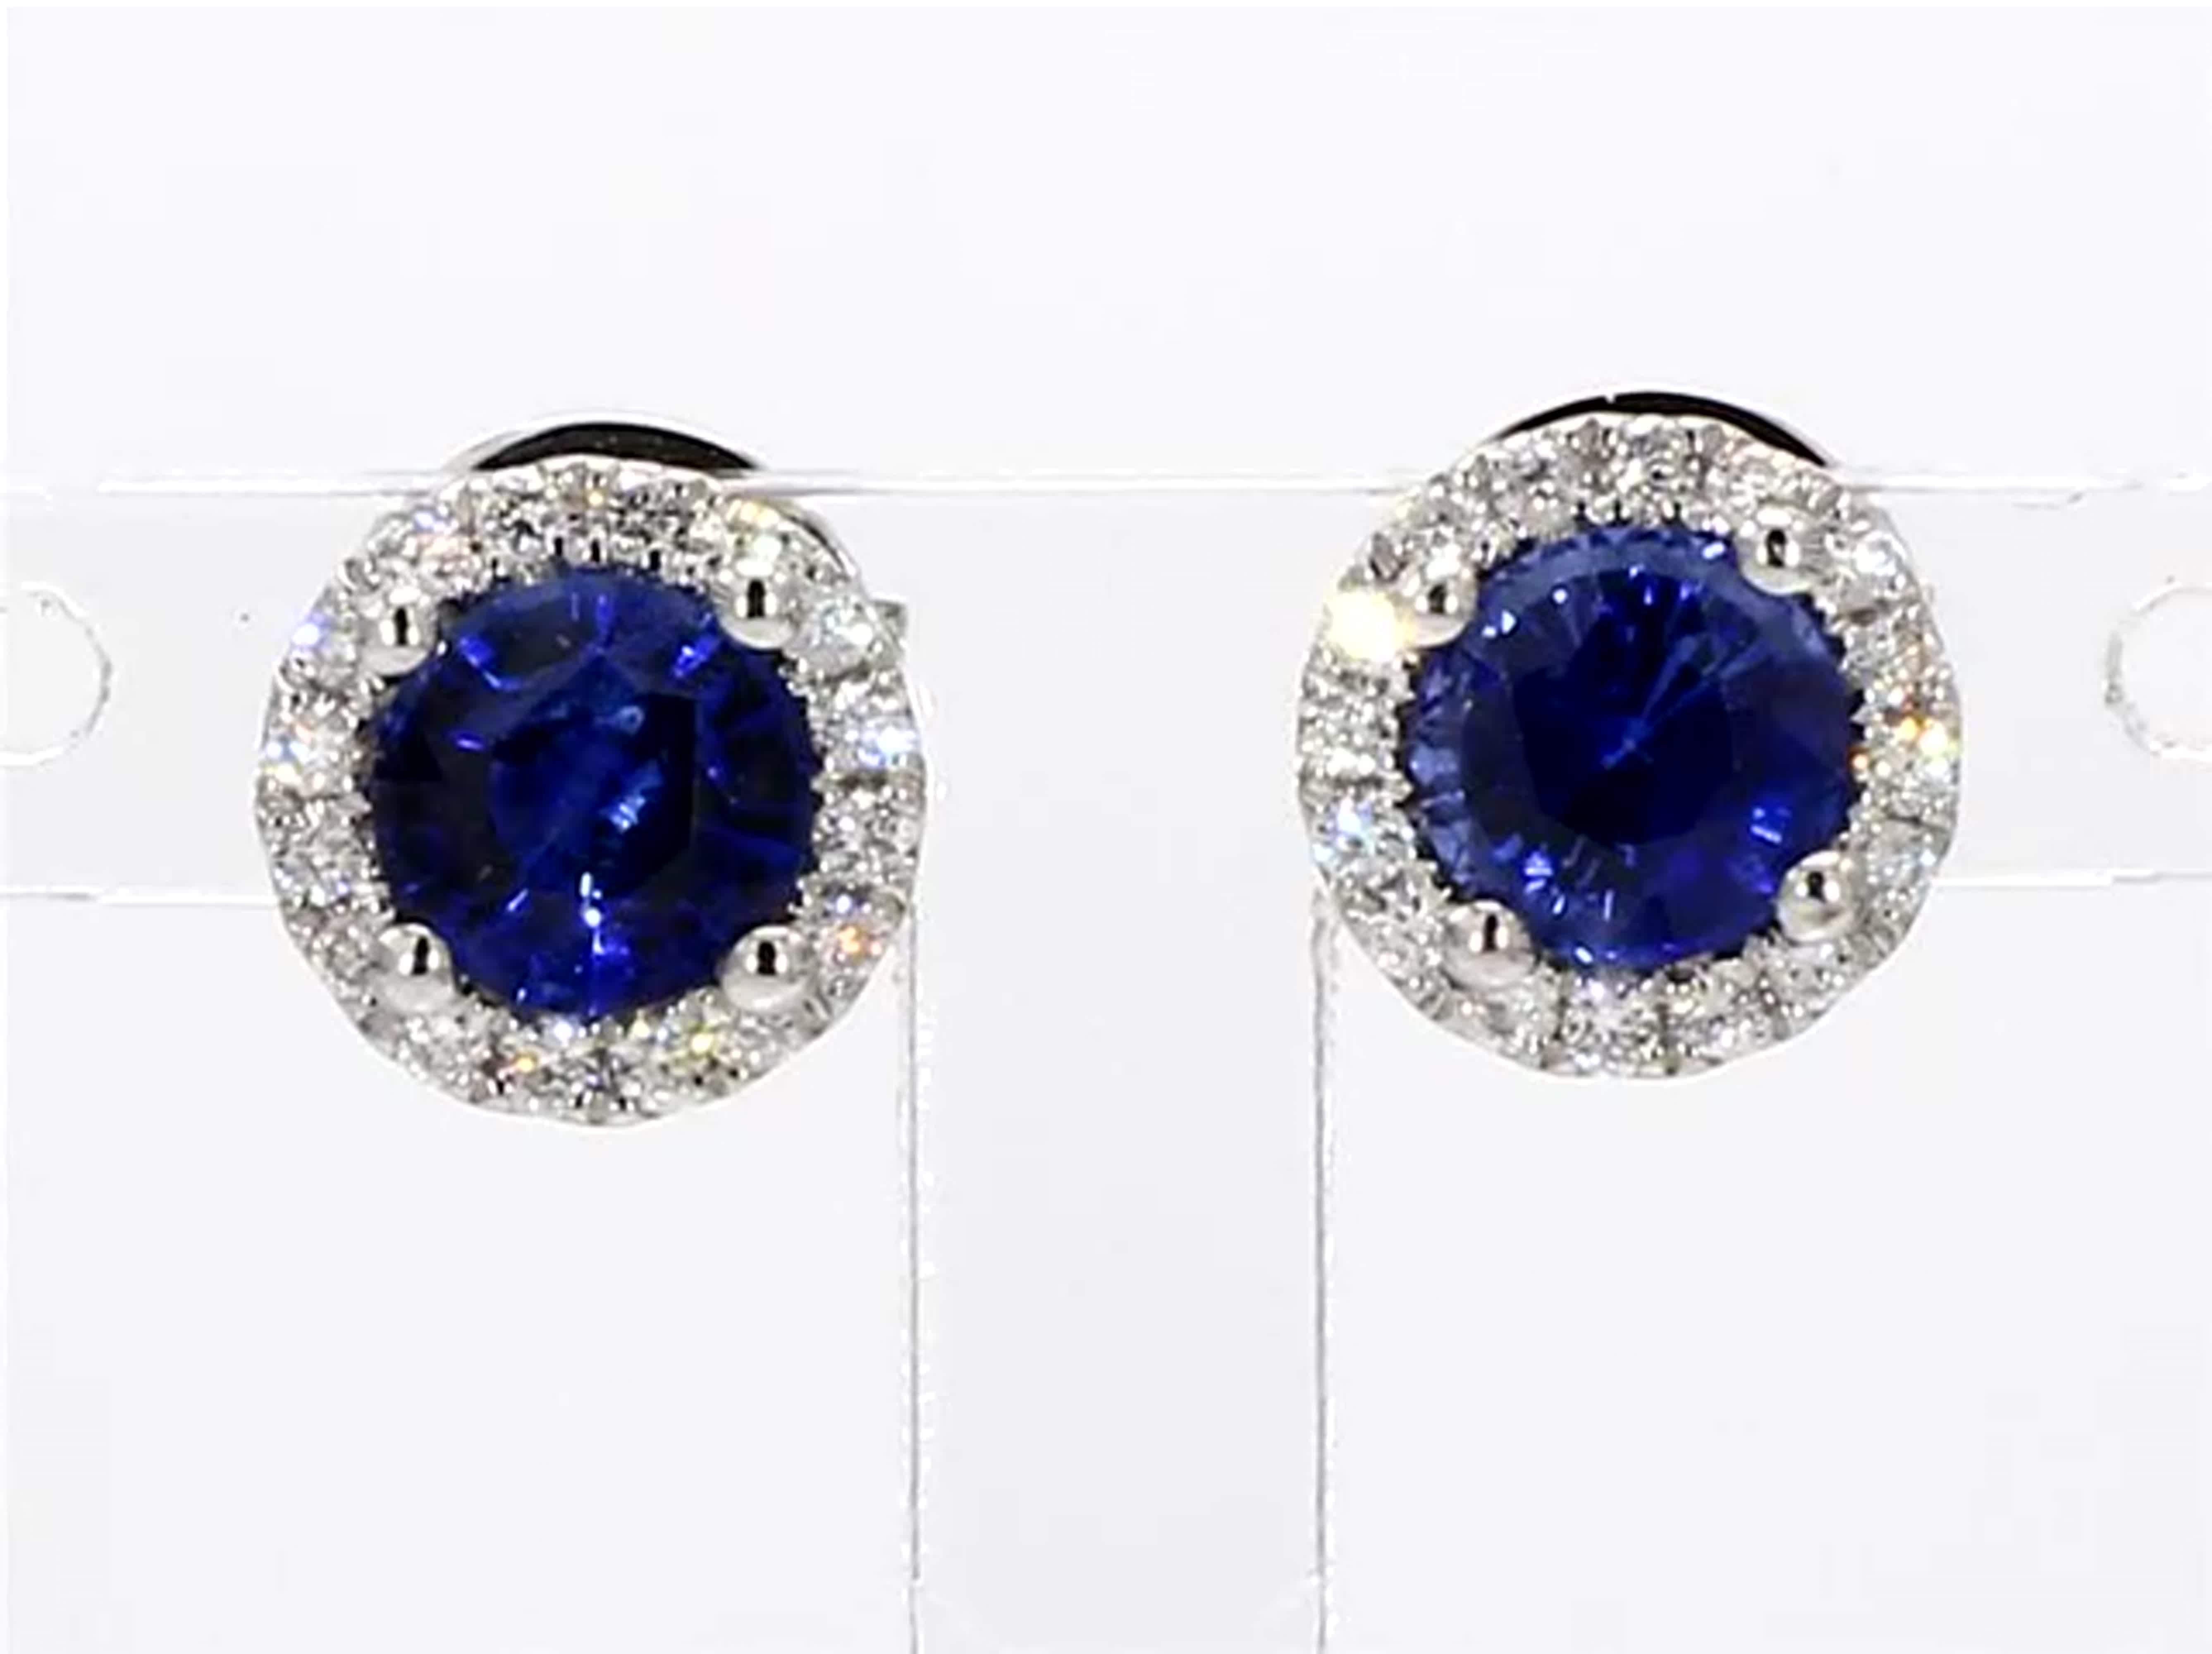 RareGemWorld's classic natural round cut sapphire earrings. Mounted in a beautiful 14K White Gold setting with natural round cut blue sapphires. The sapphires are surrounded by natural round white diamond melee in a beautiful single halo. These